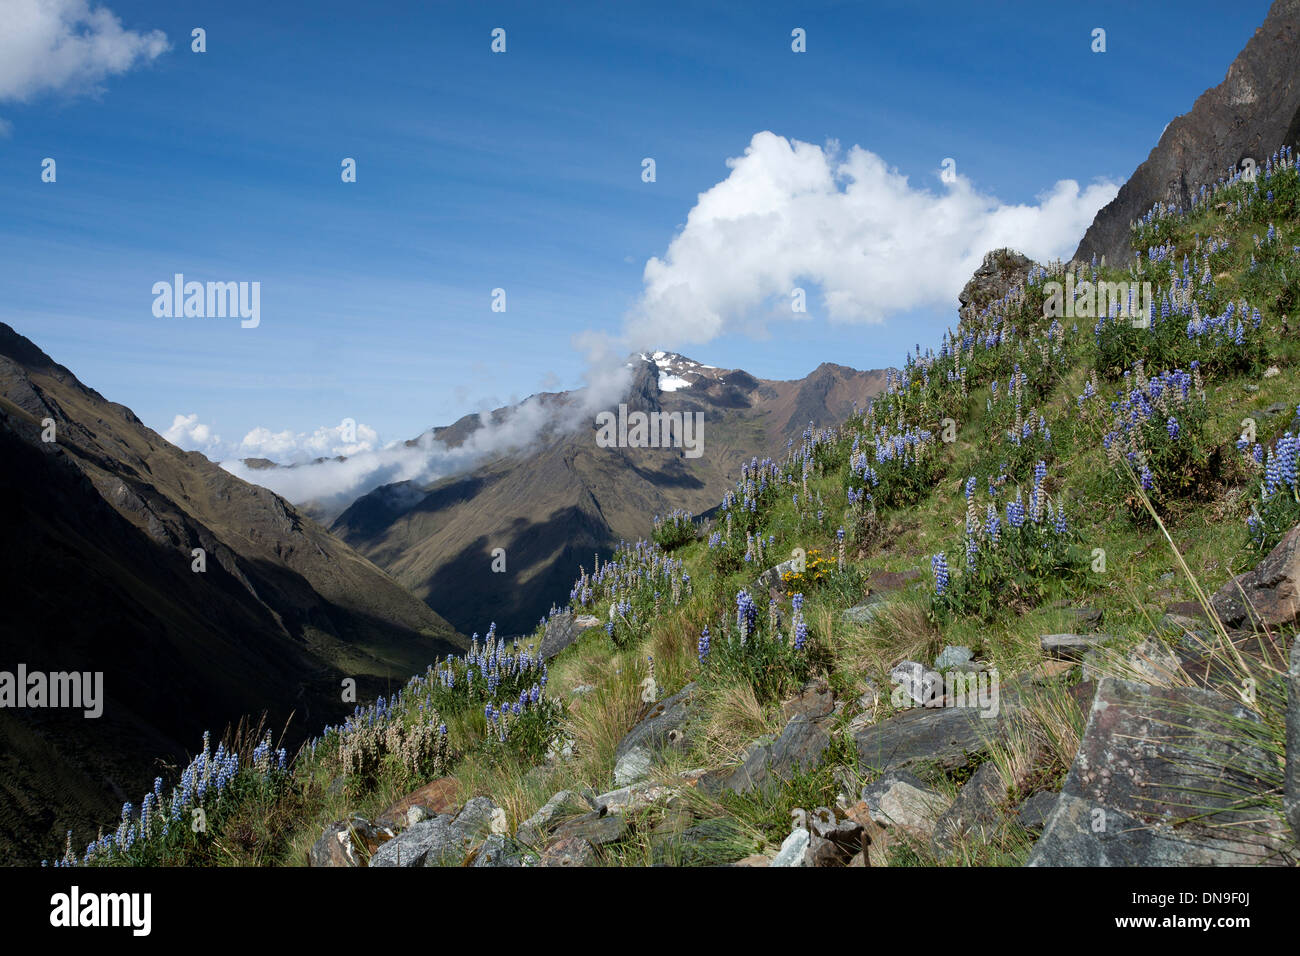 A mountainside covered in lupins in the Peruvian Andes, on the Salkantay trek Stock Photo